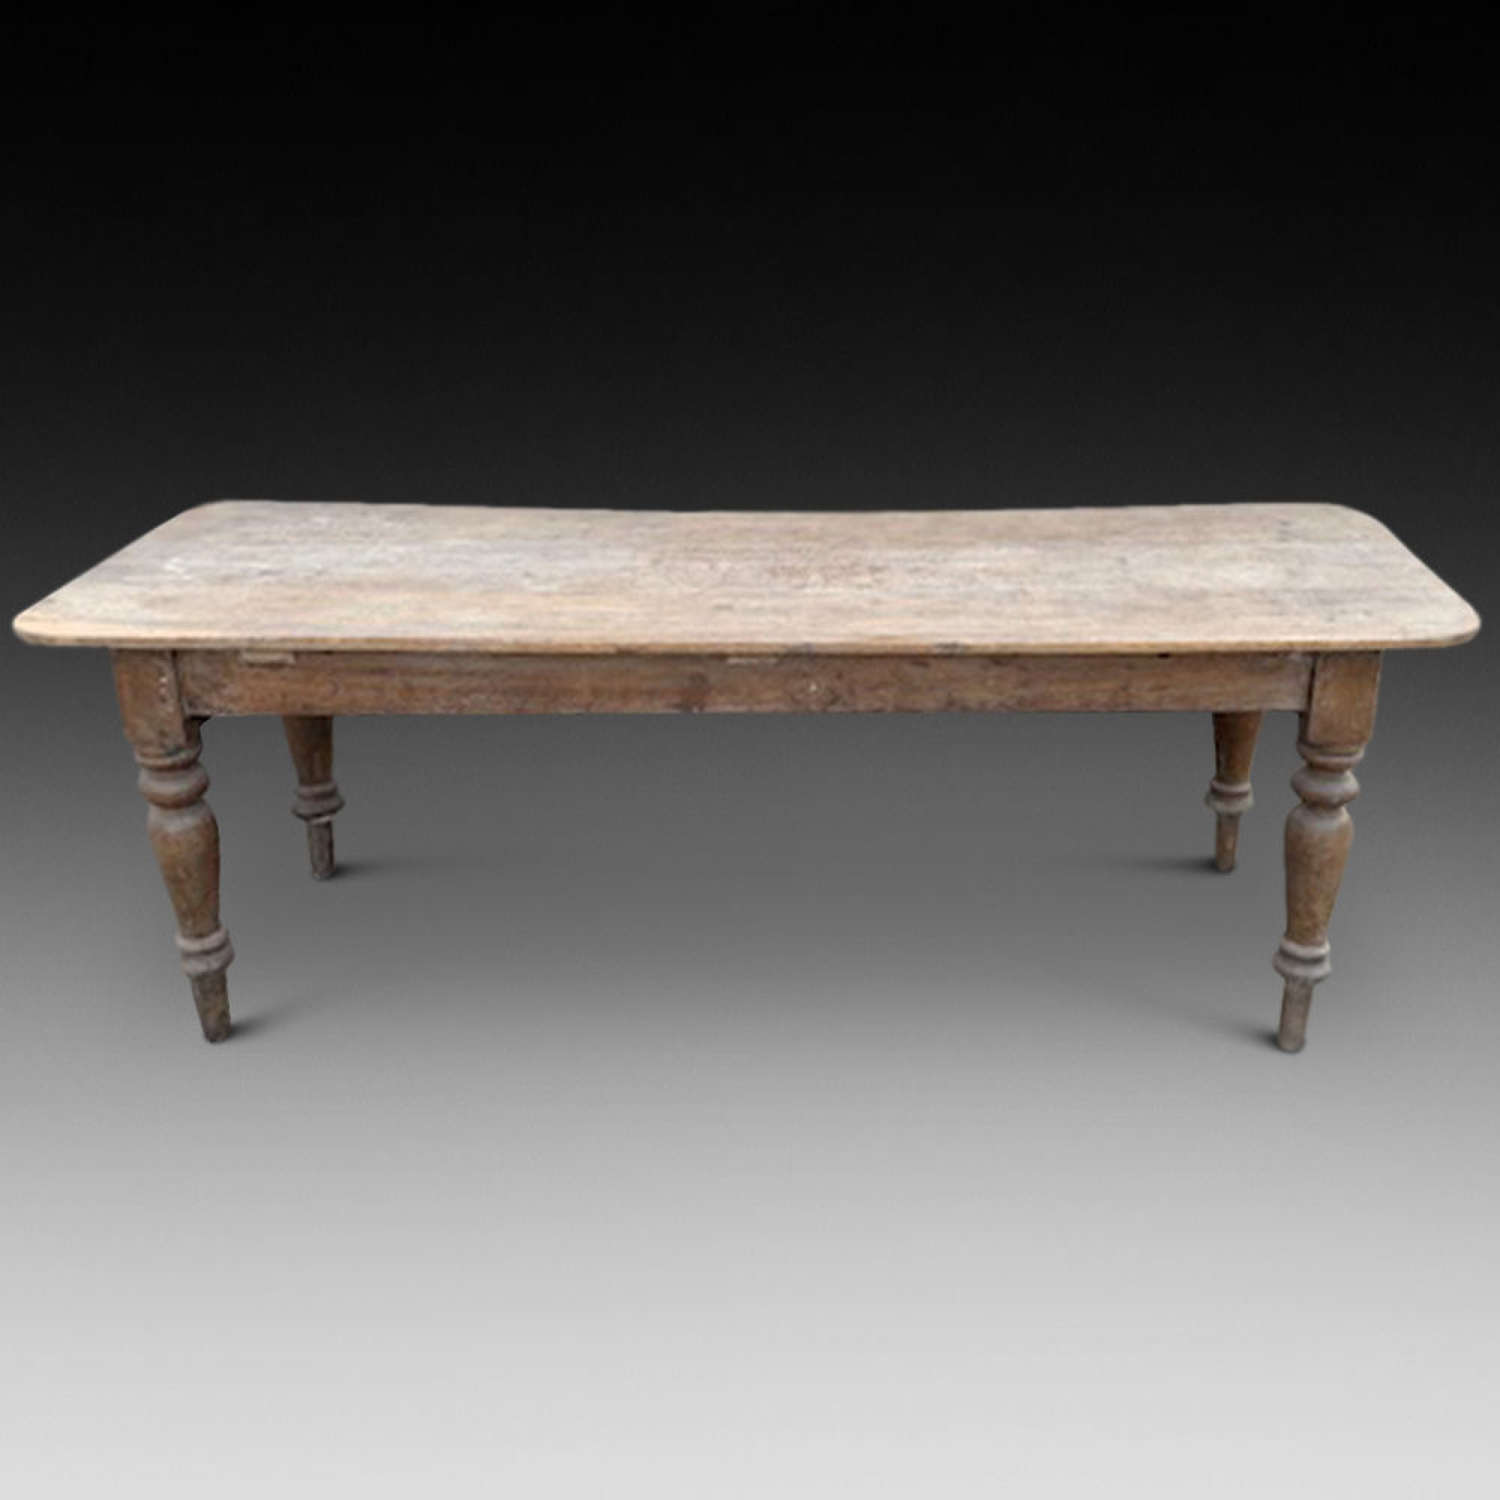 Good Oak Country Dining Table, Ca. 1850-70